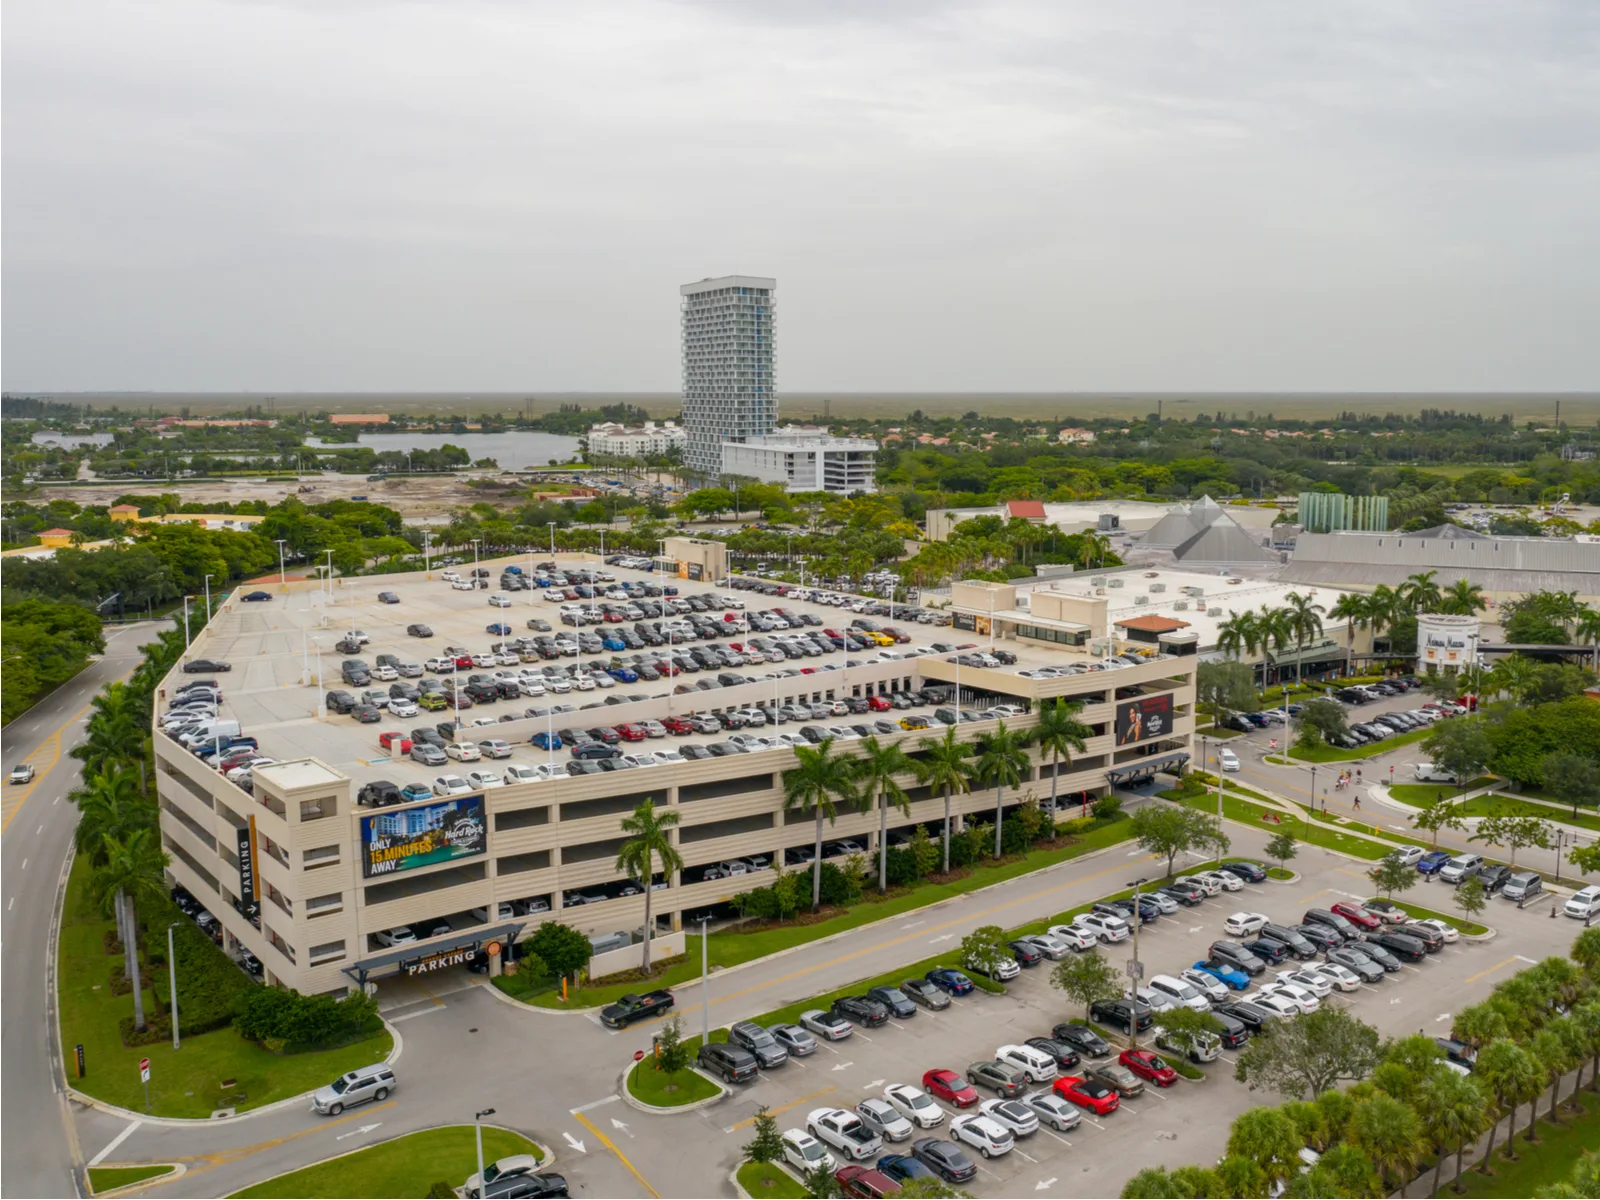 Numerous cars parked on the ground and on the roof deck of Sawgrass Mills in Florida, a piece on the best malls in America